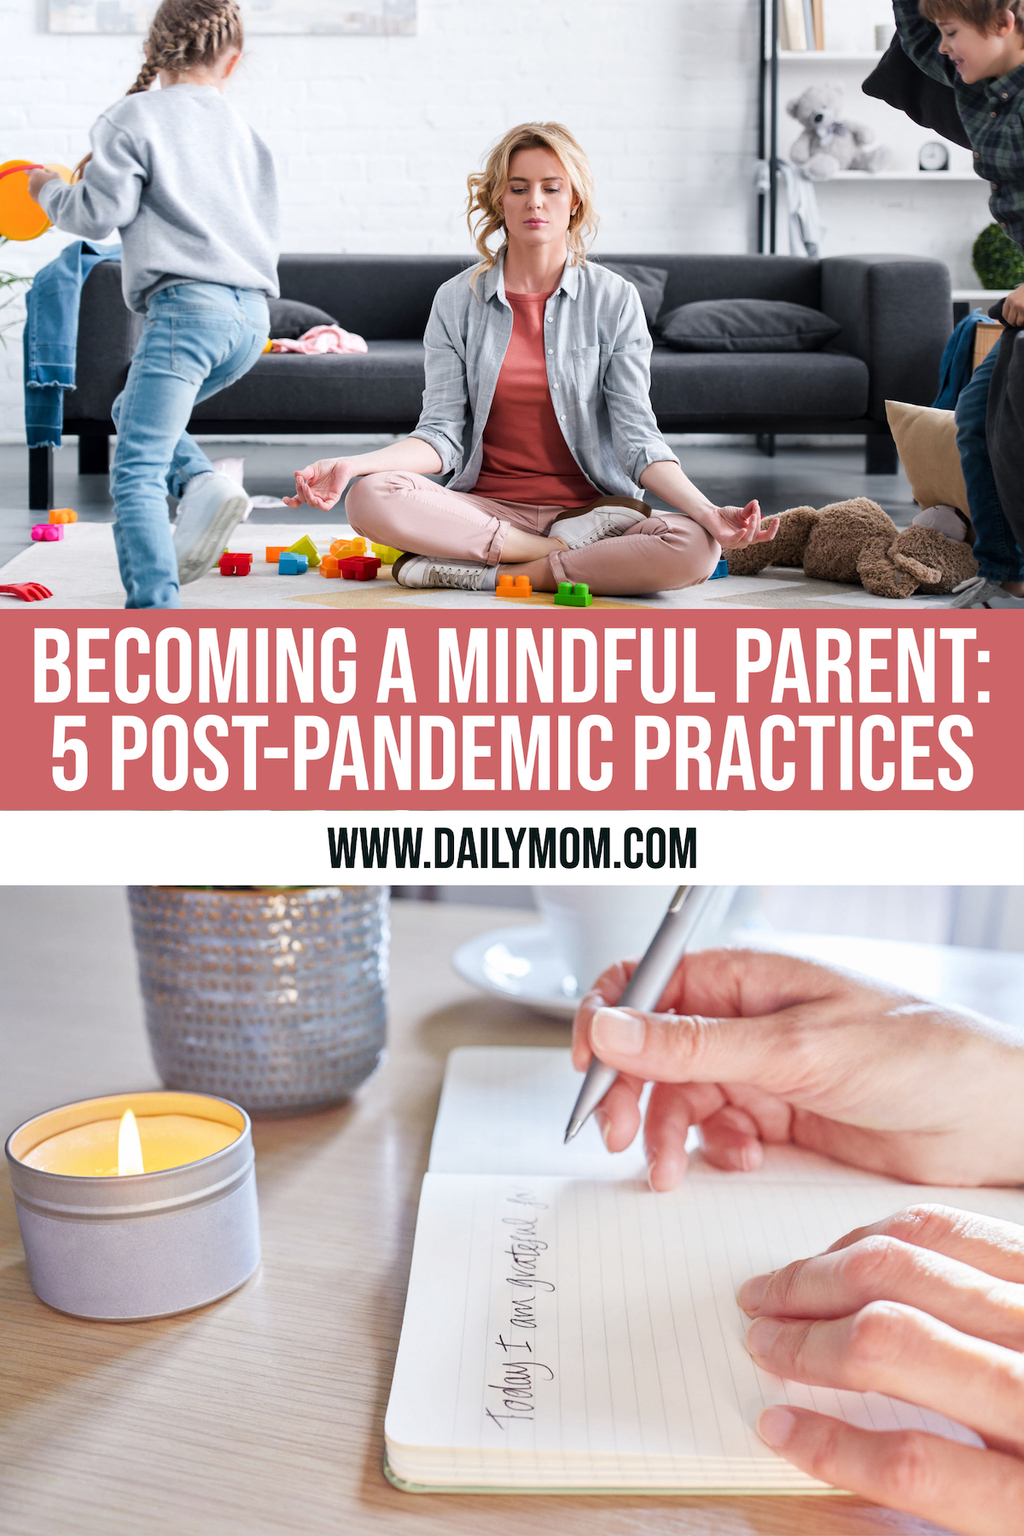 Becoming A Mindful Parent: 5 Essential Post-Pandemic Practices To Adopt